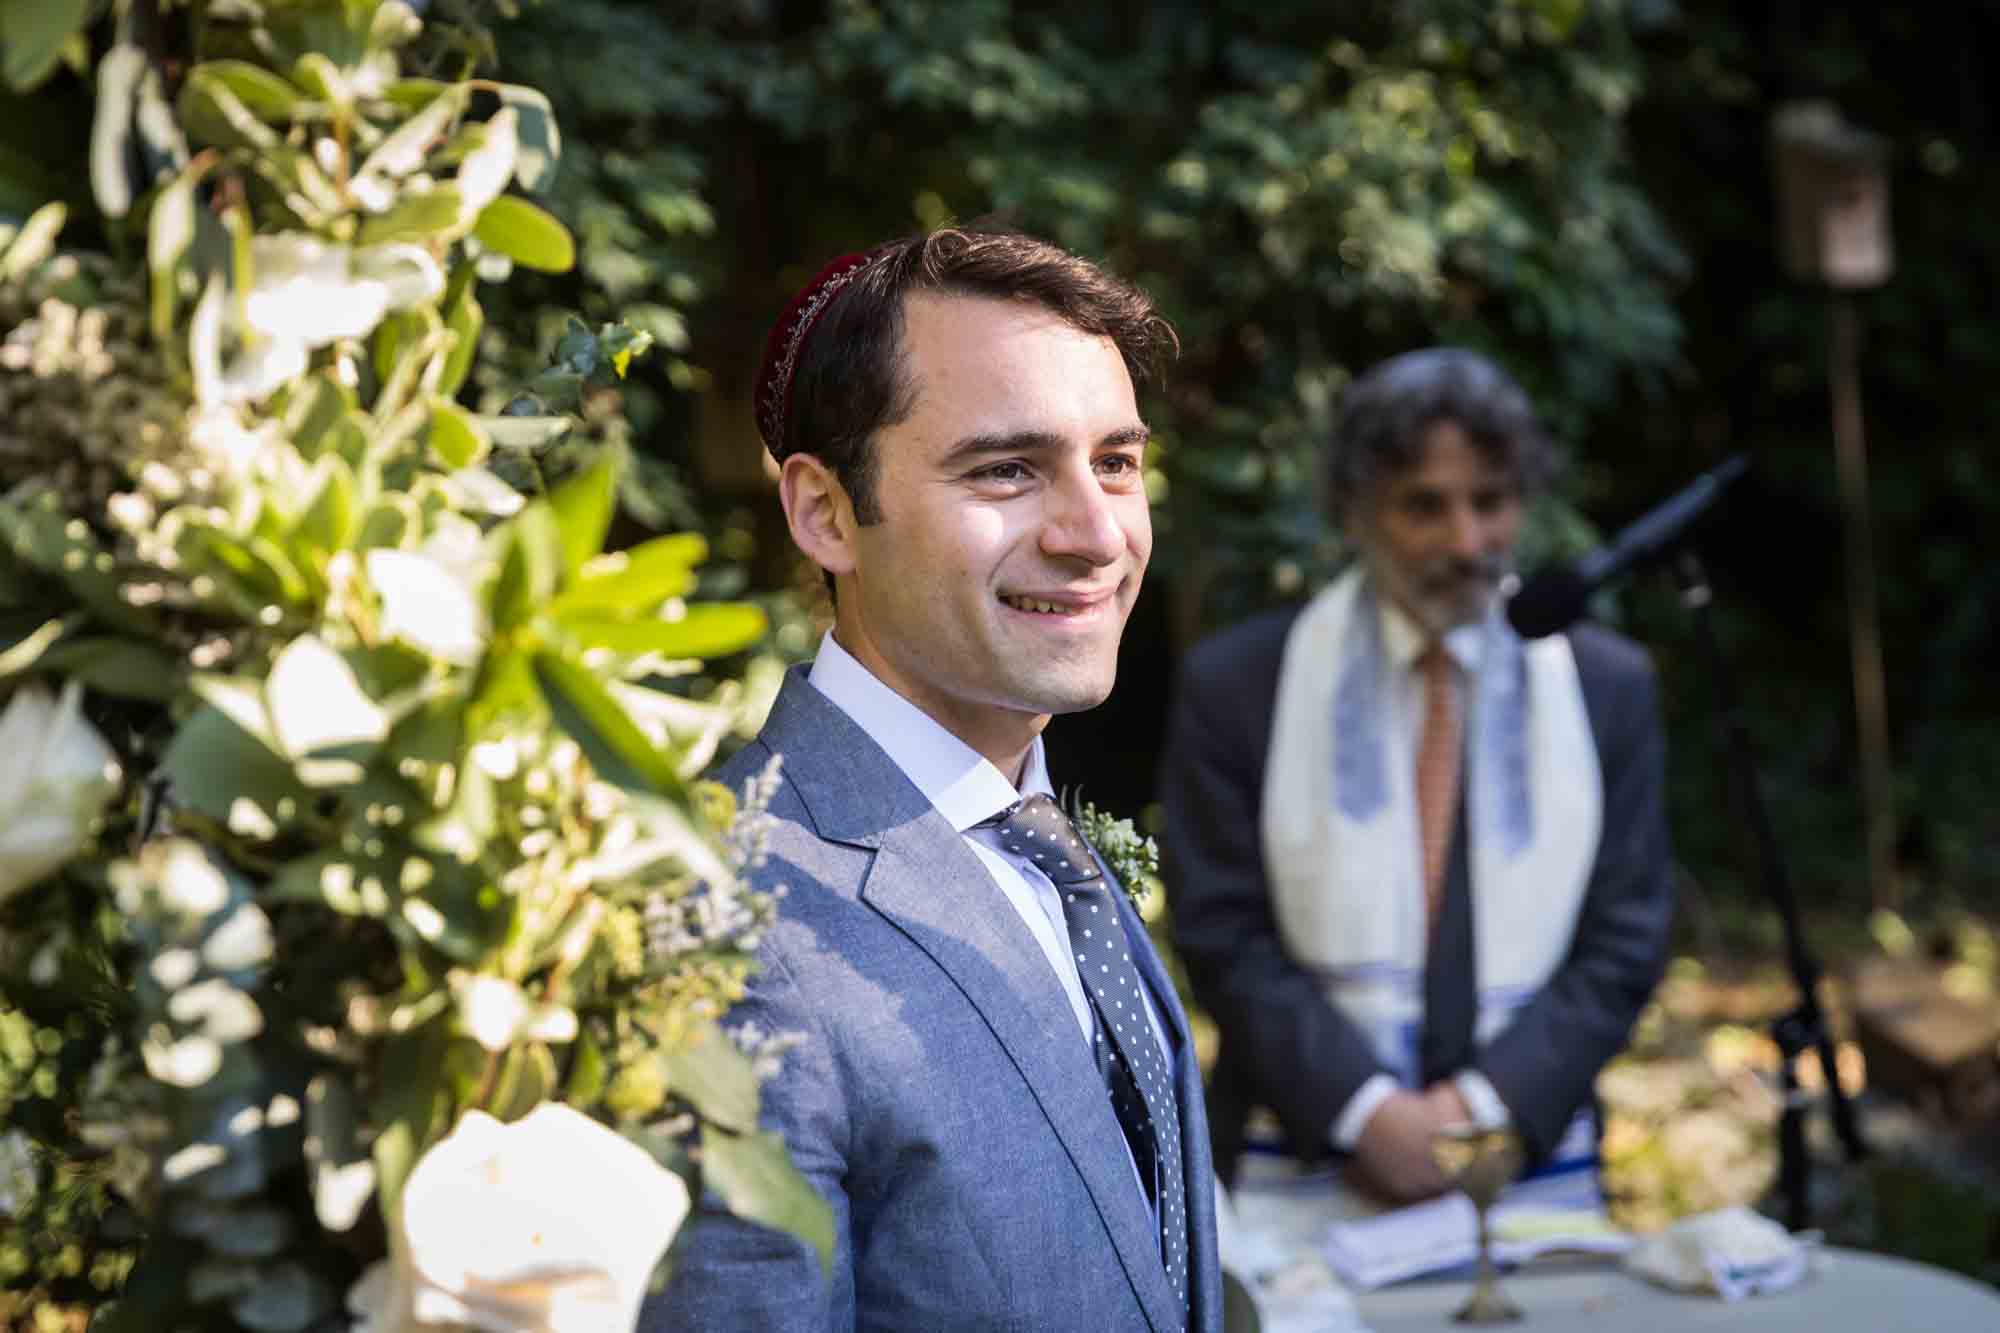 Groom waiting for bride at ceremony for an article on backyard wedding tips